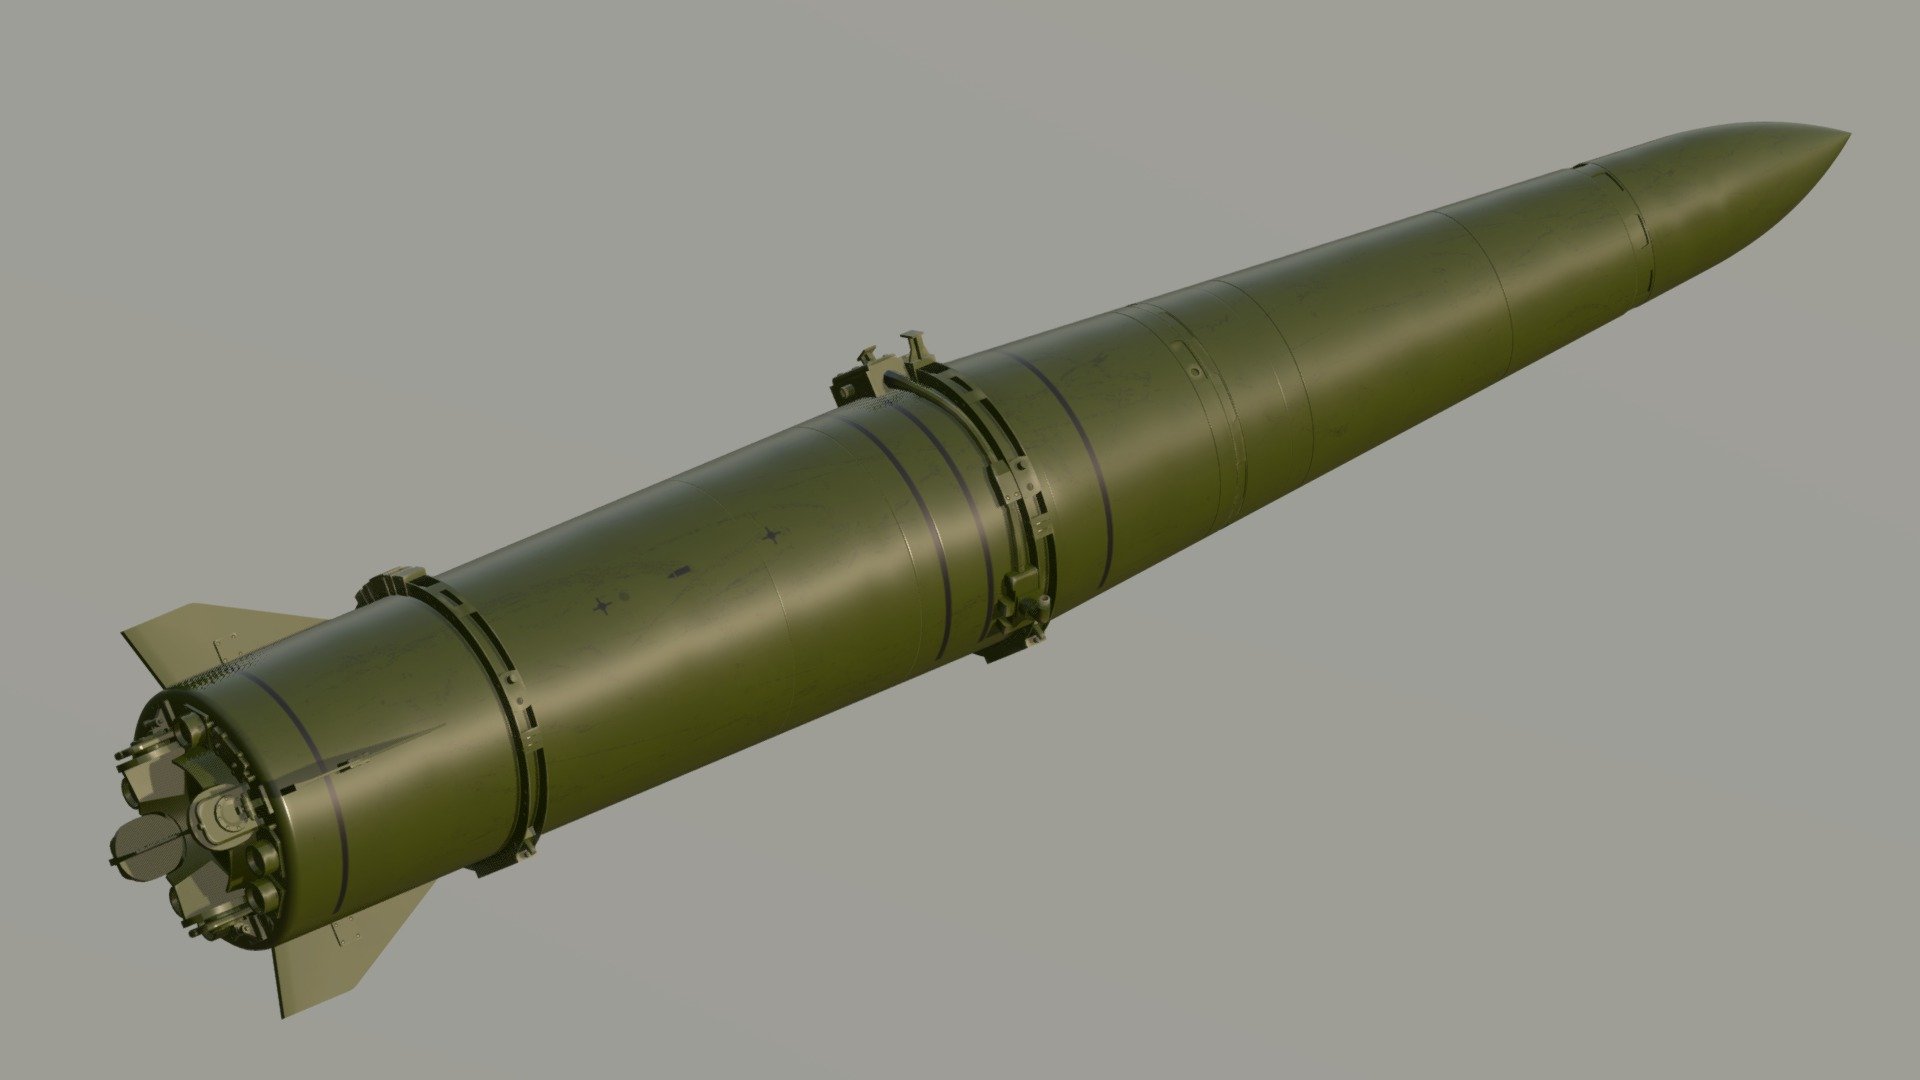 High-detailed, photorealistic Iskander missile model by 3d_molier International. Link to the model: -link removed- - 9M723 Iskander missile - 3D model by Jeyhun1985 3d model